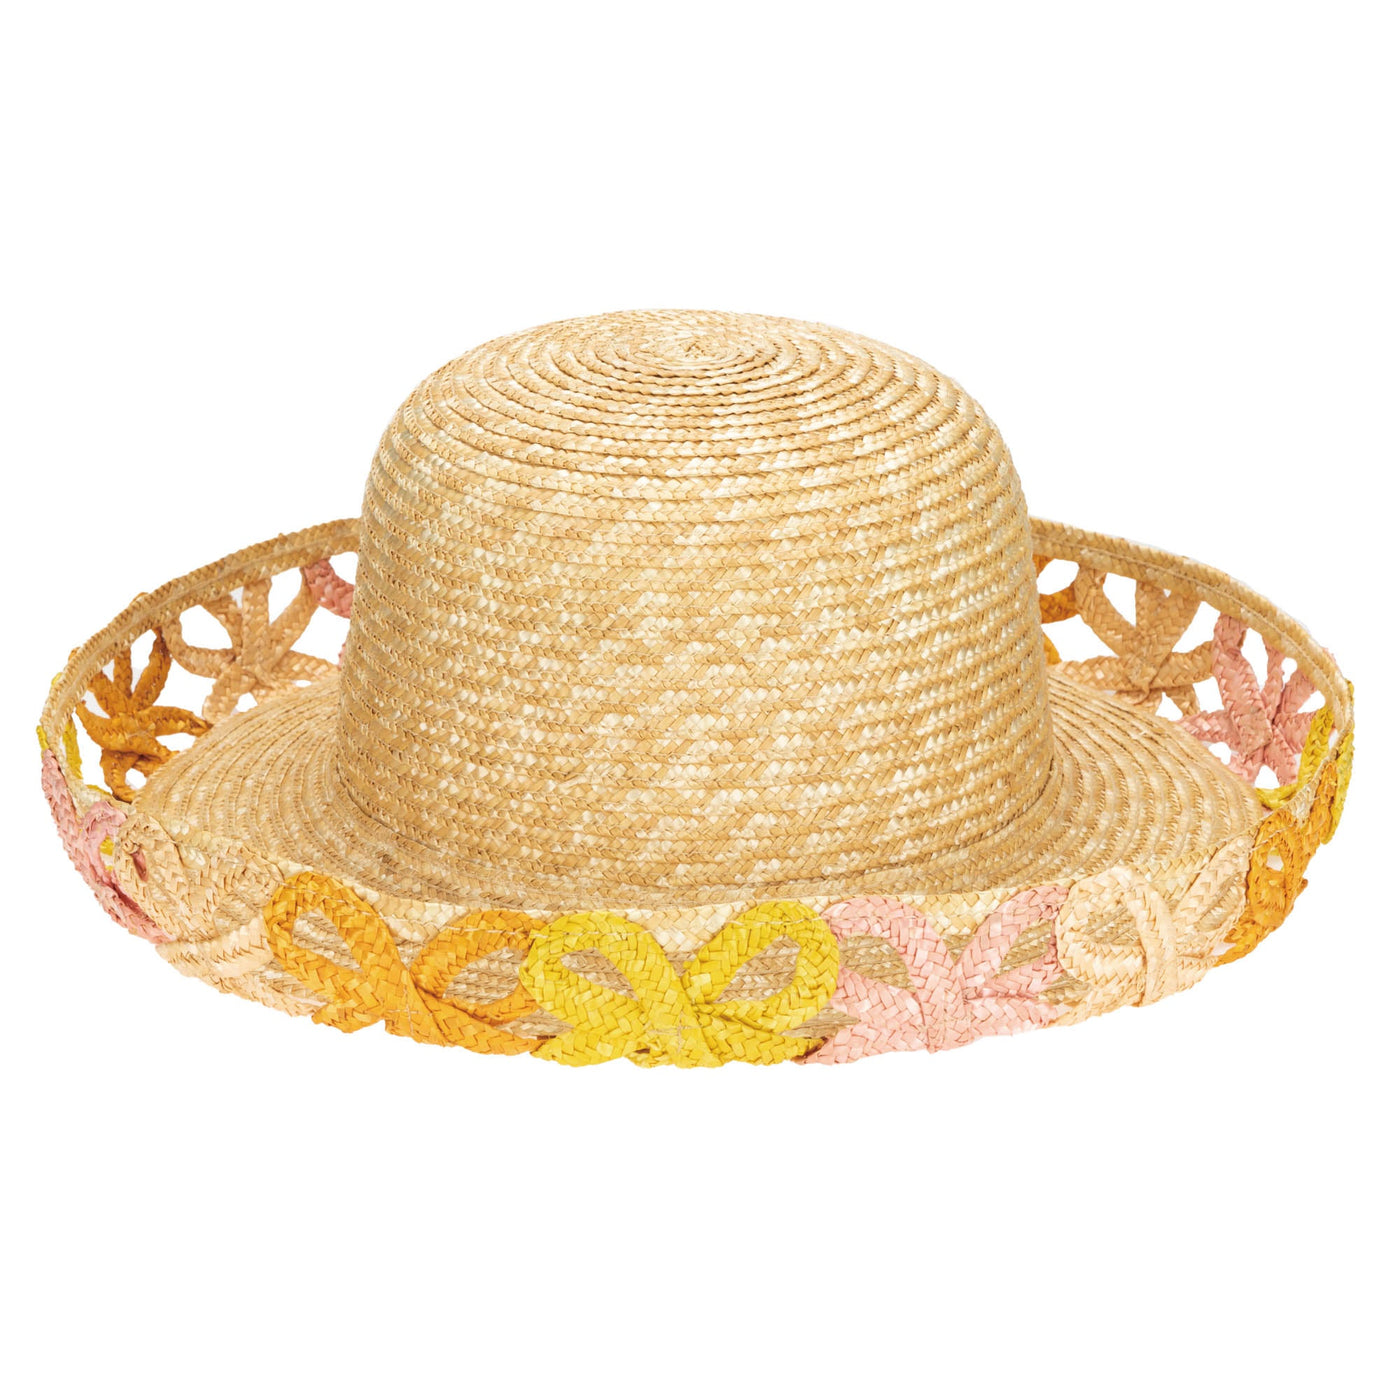 Positano - Women's Turned Up Kettle Brim with Open Weave-KETTLE BRIM-San Diego Hat Company